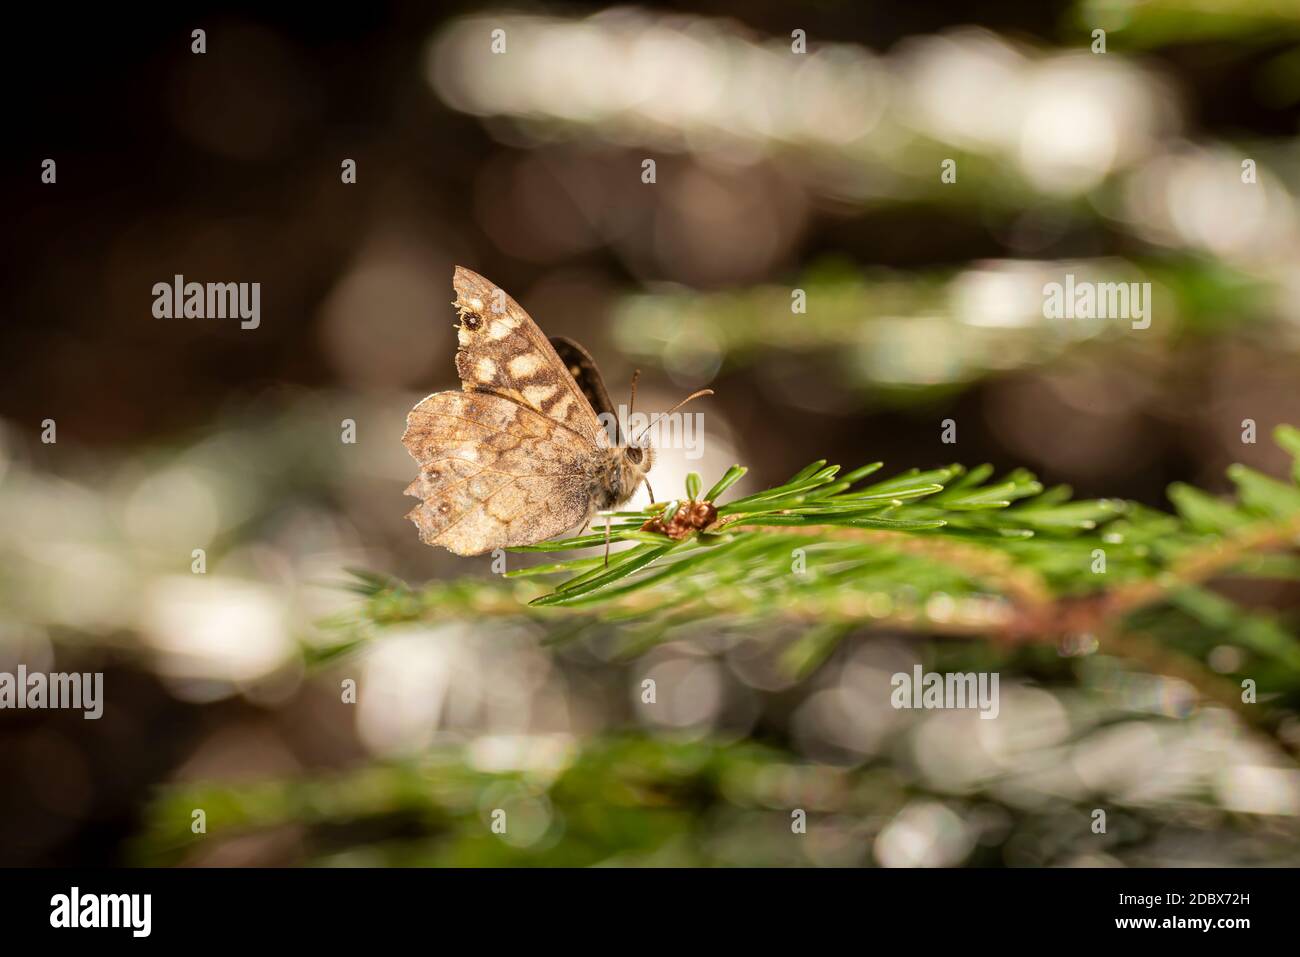 Small brown butterfly sits on a pine branch against a blurred brown background with copy space Stock Photo